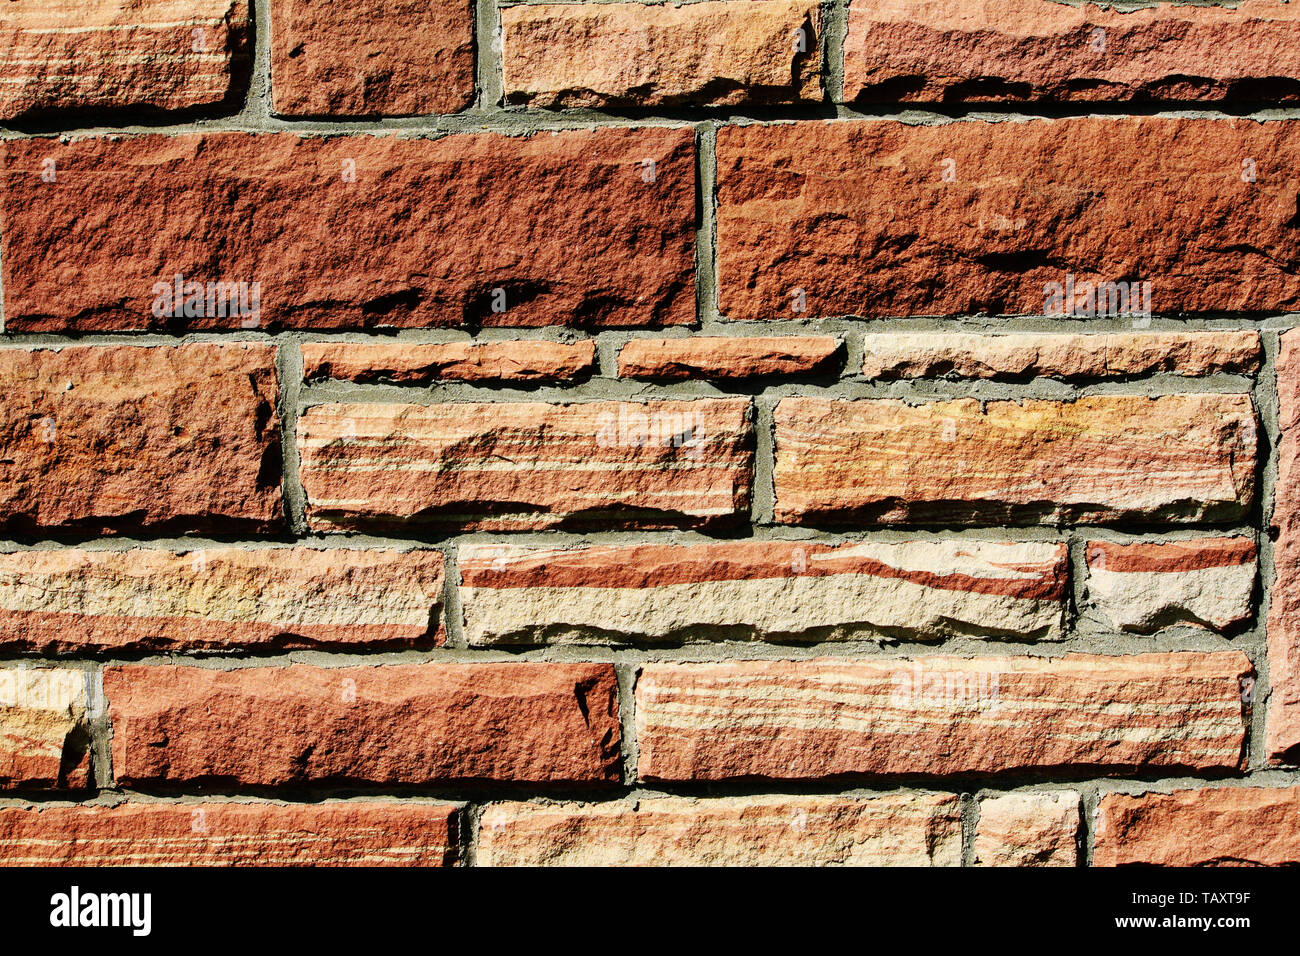 Texture background of a red sandstone wall. Stock Photo